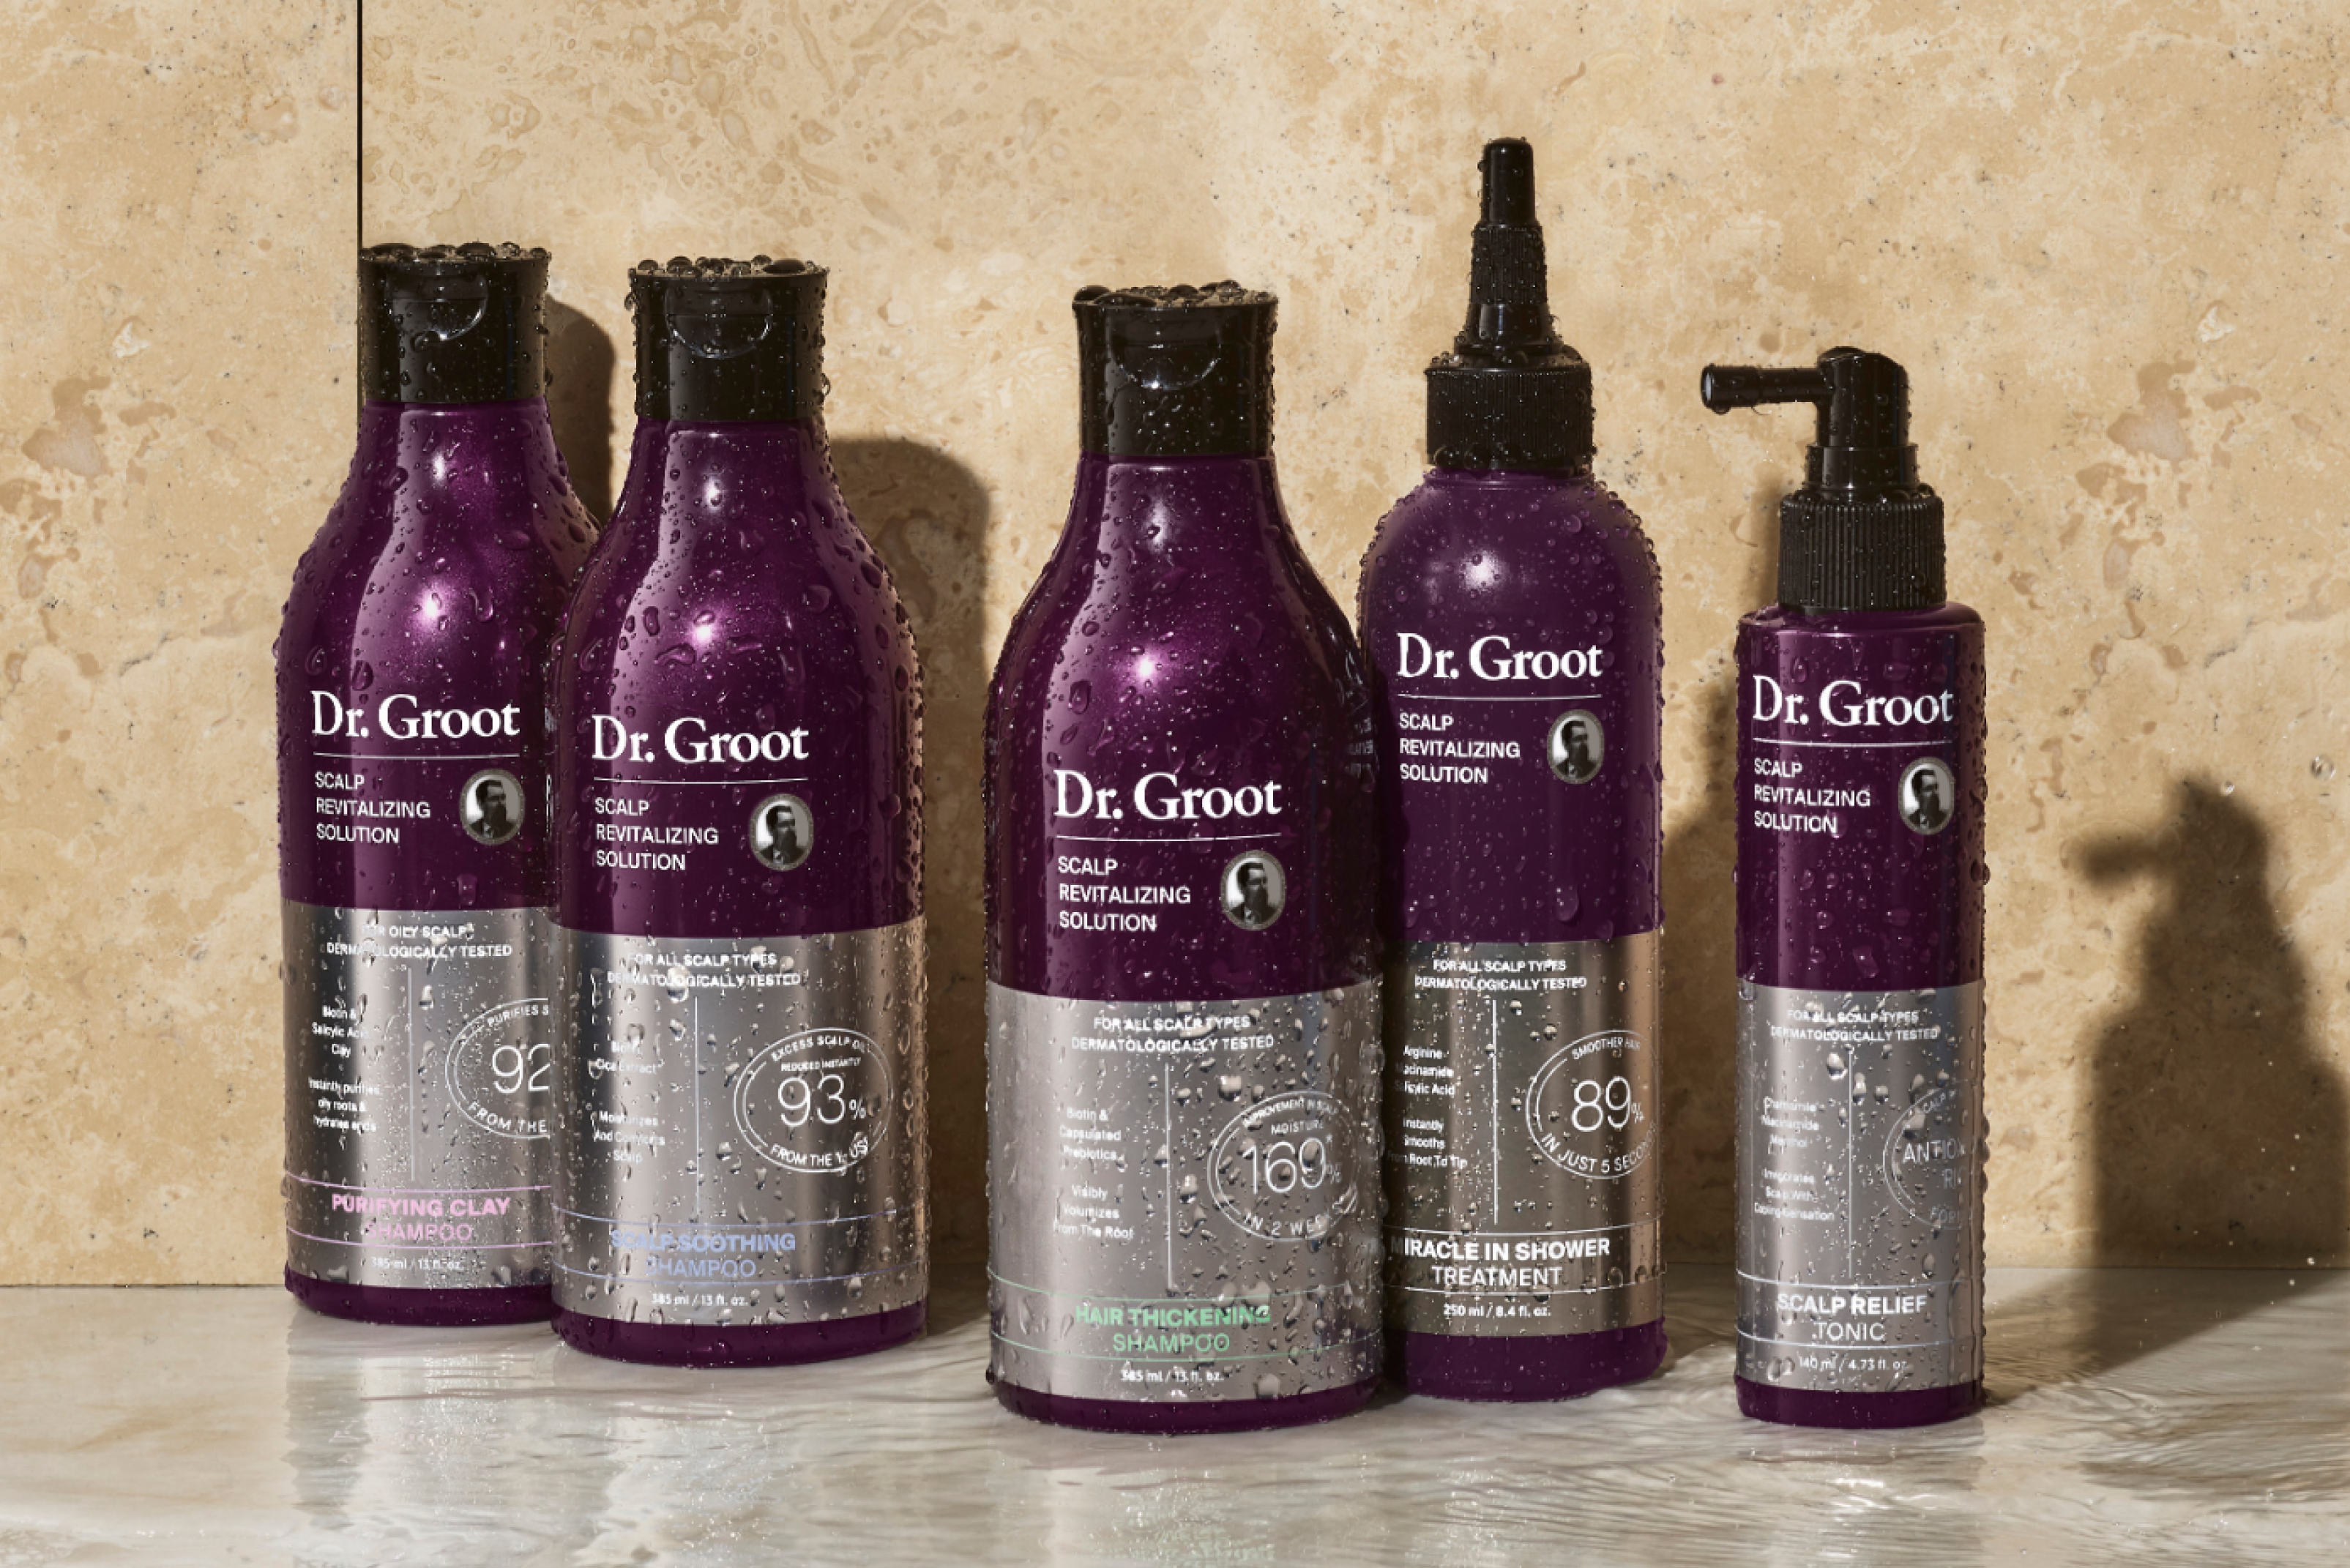 A range of Dr. Groot scalp care and shampoo products sit on a bathroom shelf.